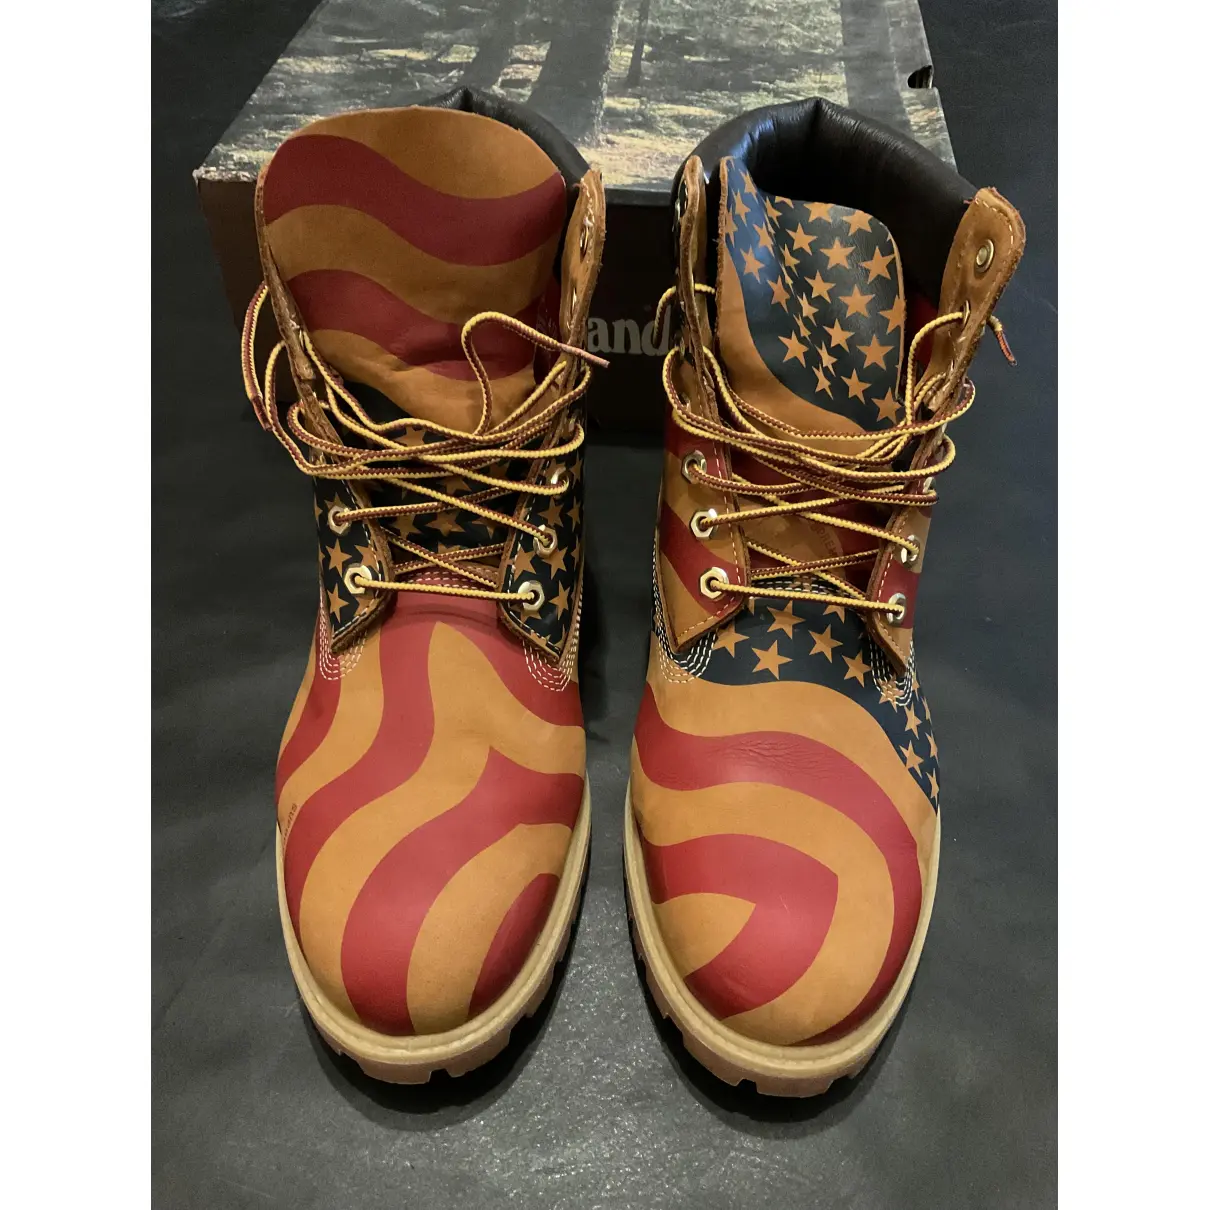 Buy SUPREME X TIMBERLAND Leather boots online